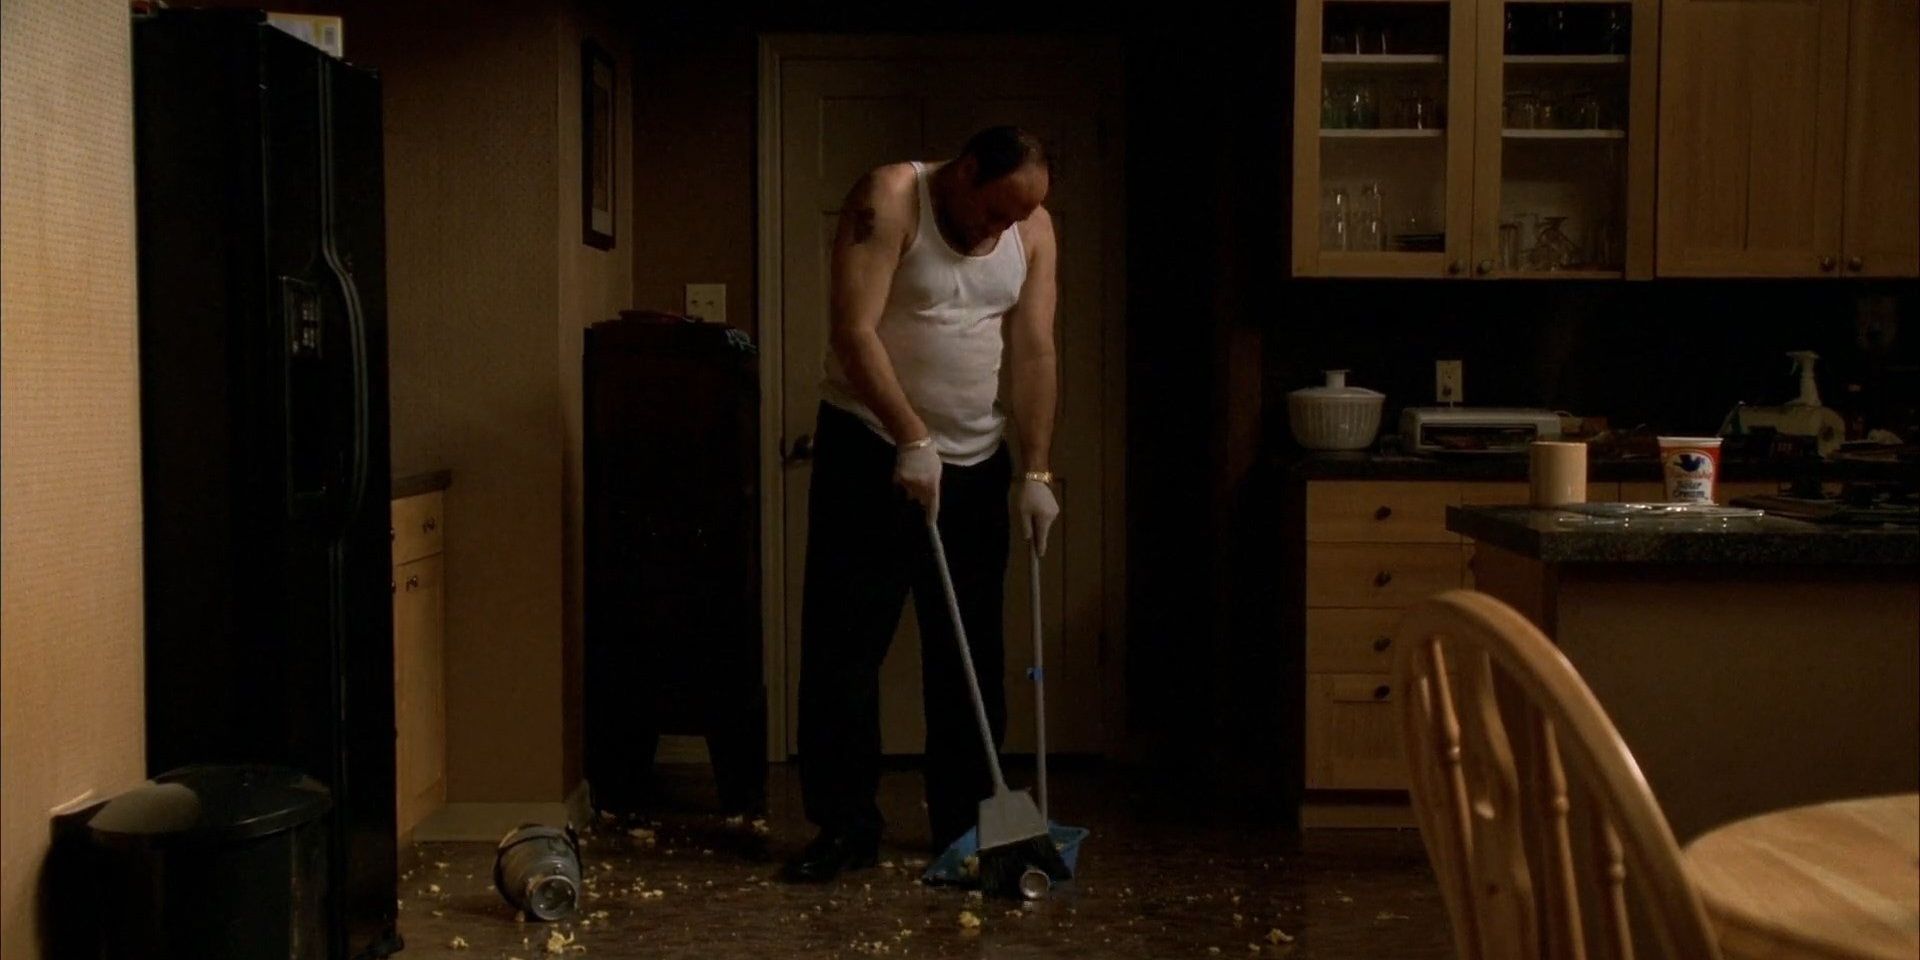 The Sopranos: Tony Soprano sweeping up garbage from the kitchen floor